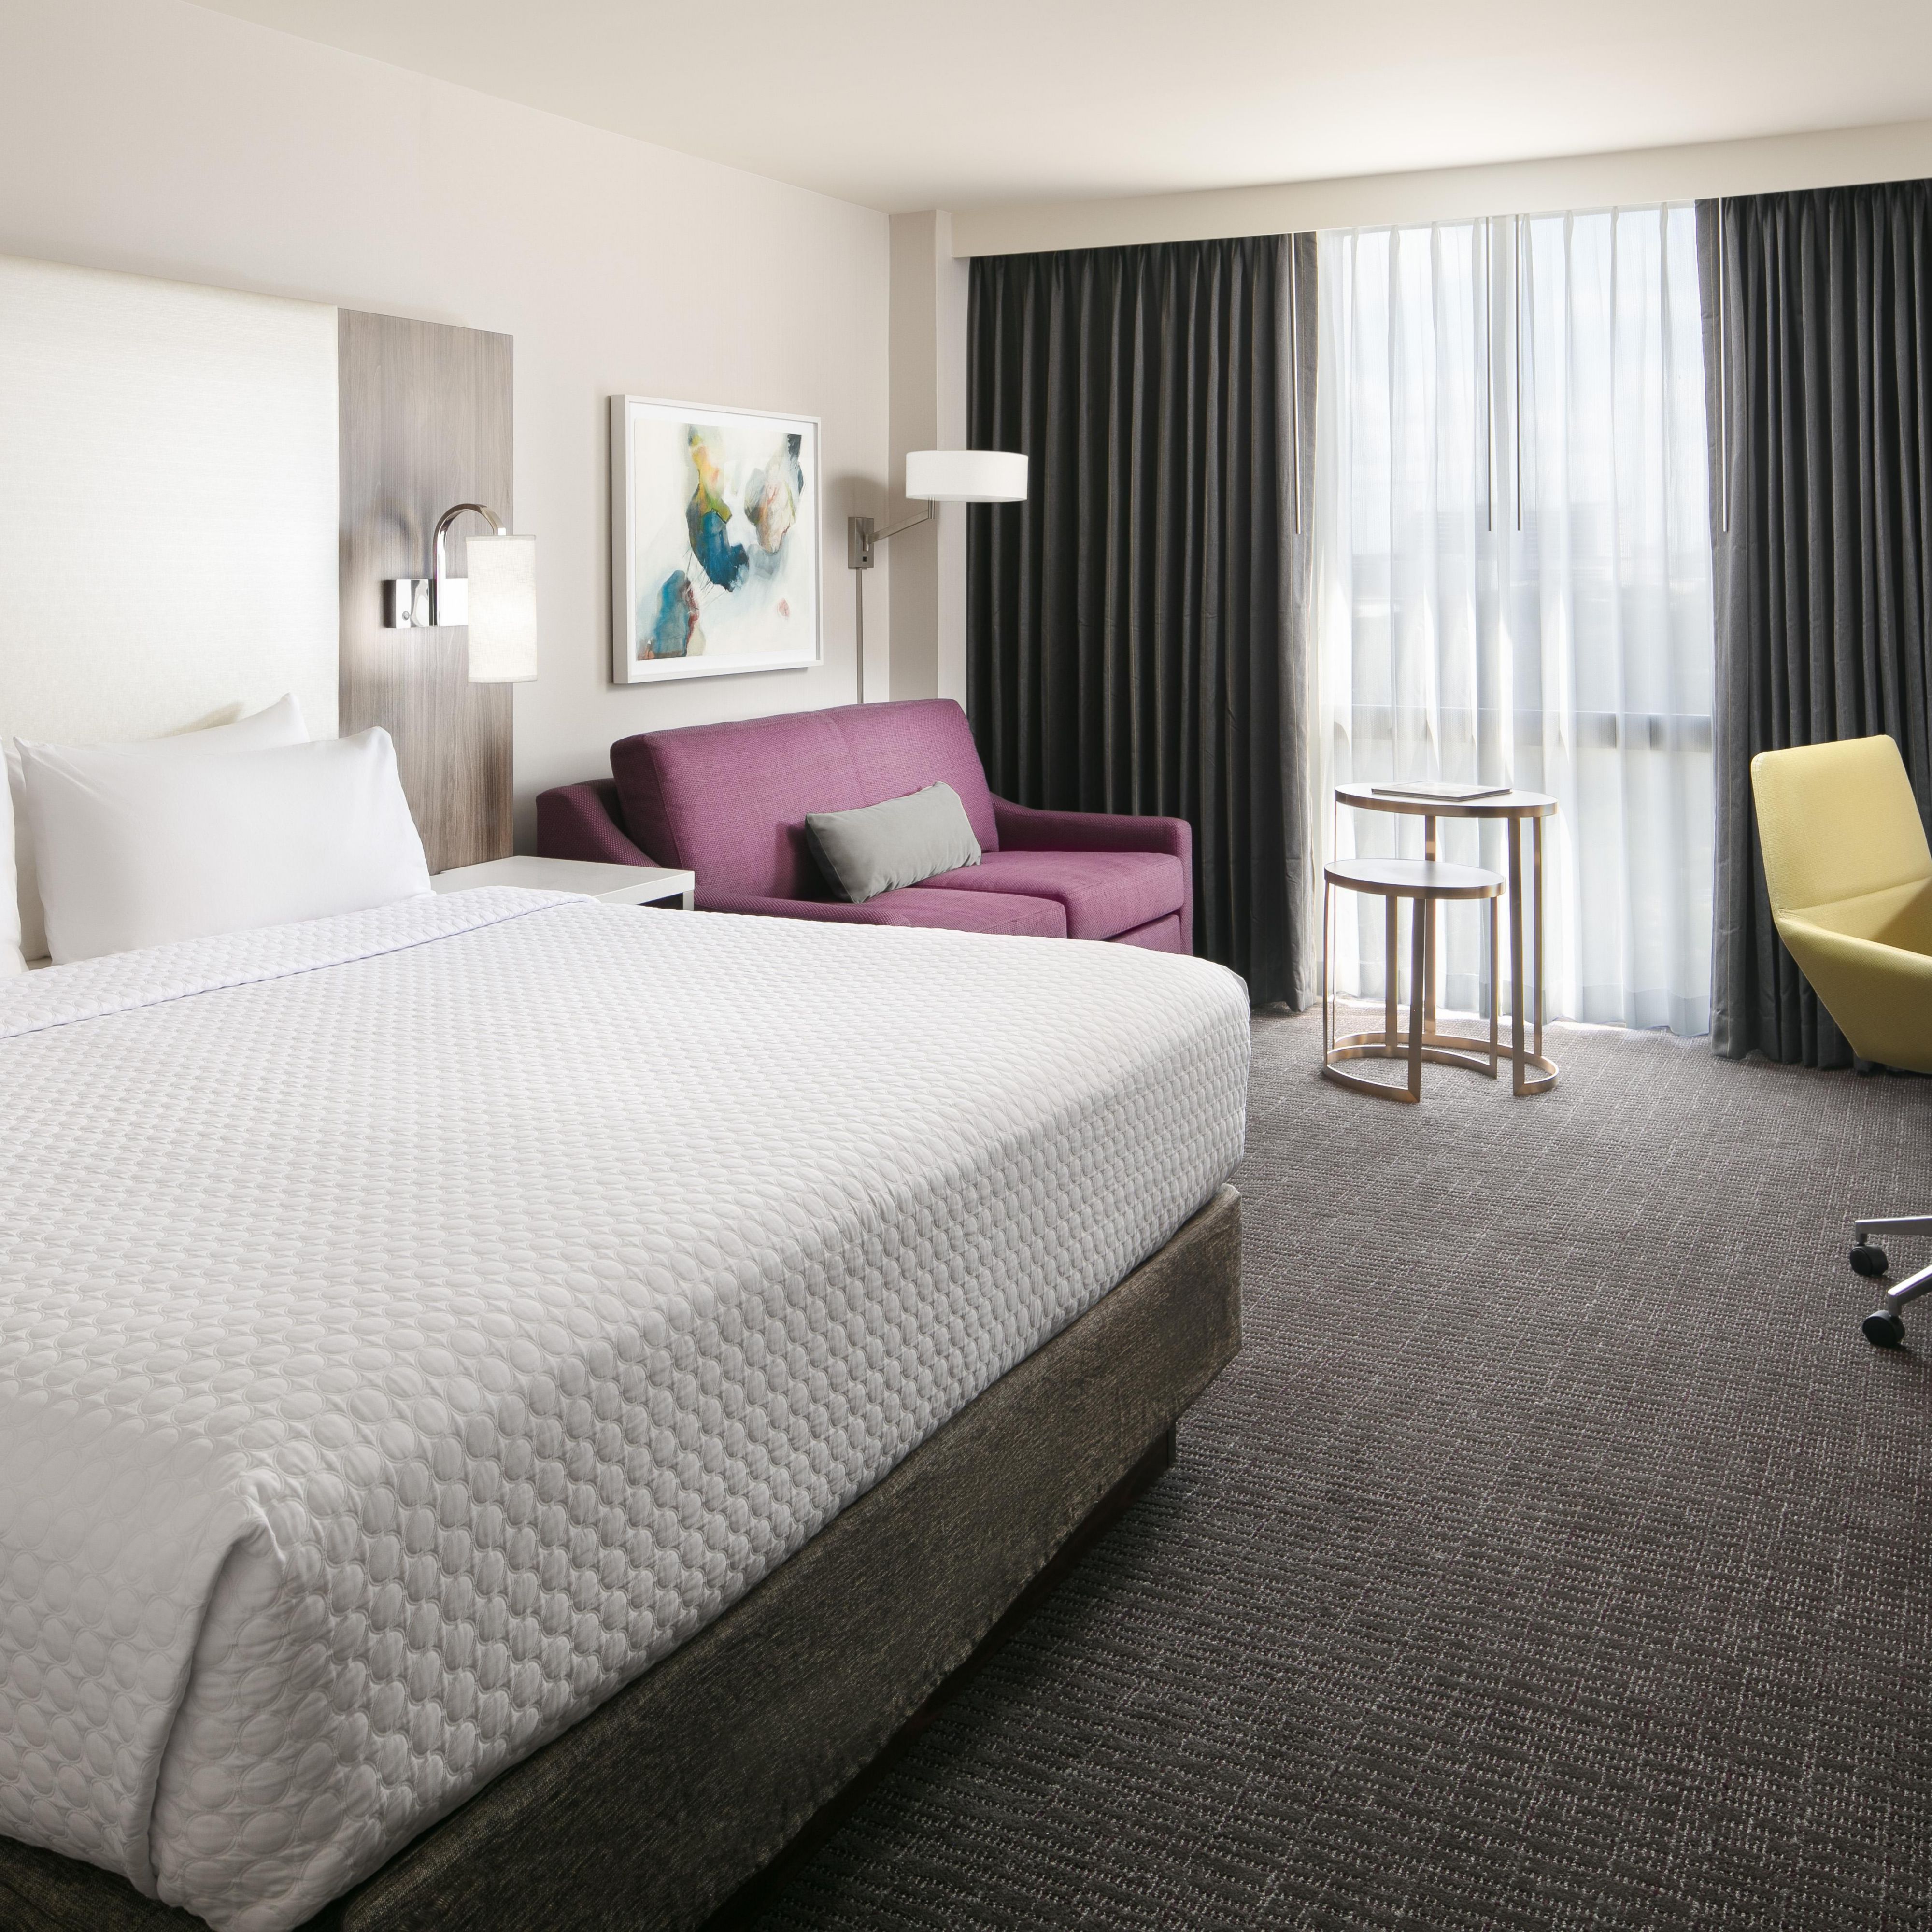 Check out our recently refreshed guest rooms!